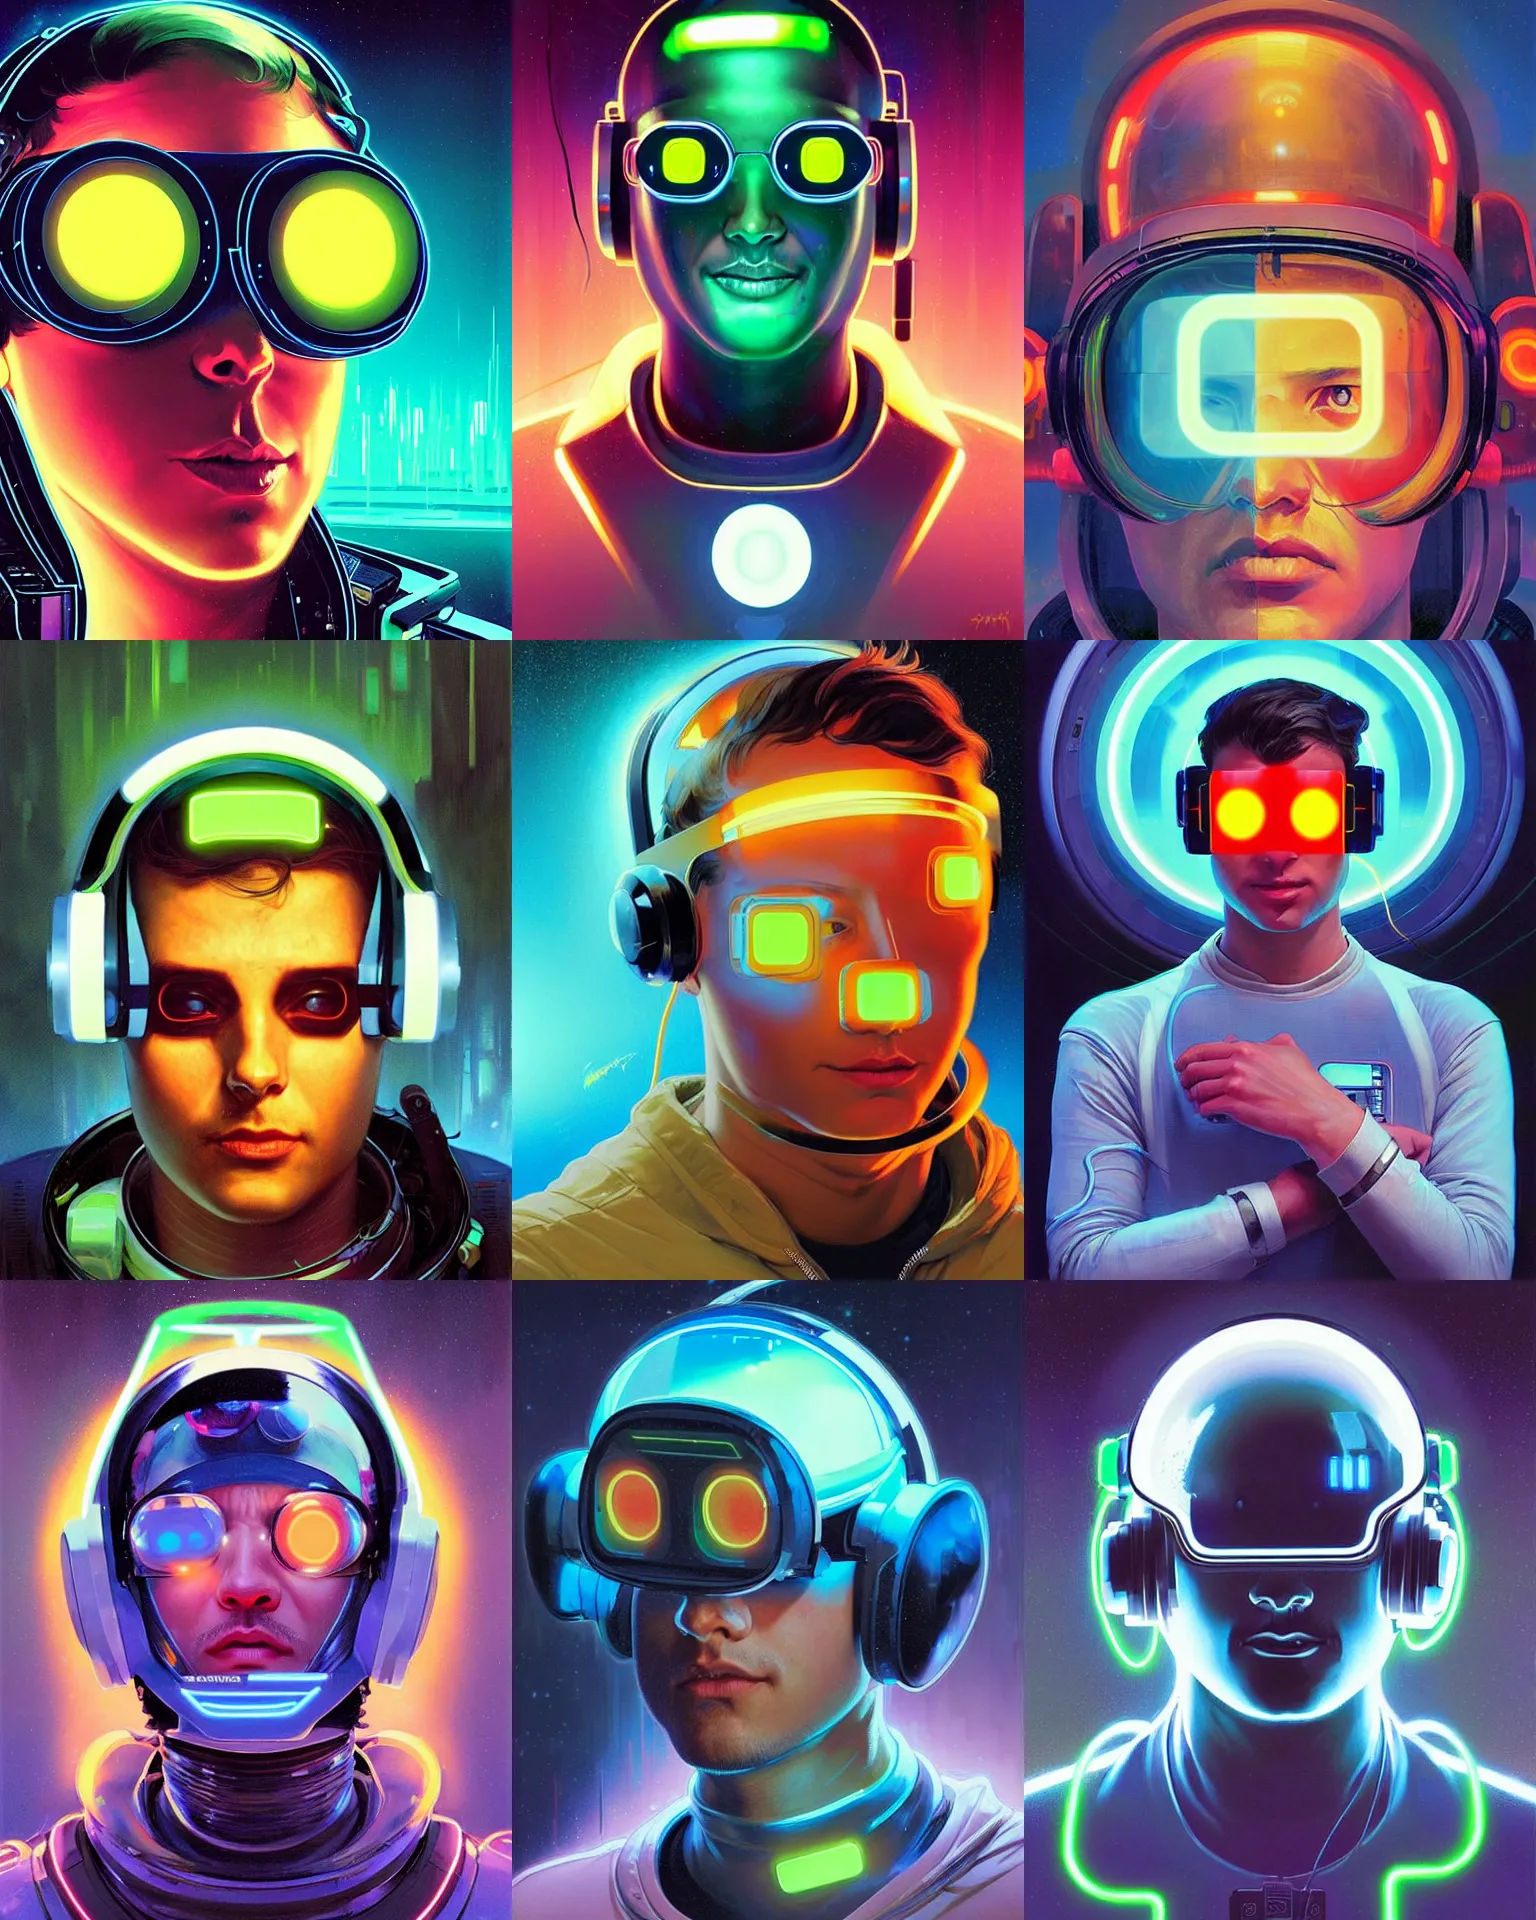 Prompt: sillouete future coder man, sleek cyclops display over eyes and glowing headset, neon accents, holographic colors, desaturated headshot portrait digital painting by john berkey, rhads, dean cornwall, alphonse mucha, donato giancola, alex grey, tom whalen, astronaut cyberpunk electric lights profile